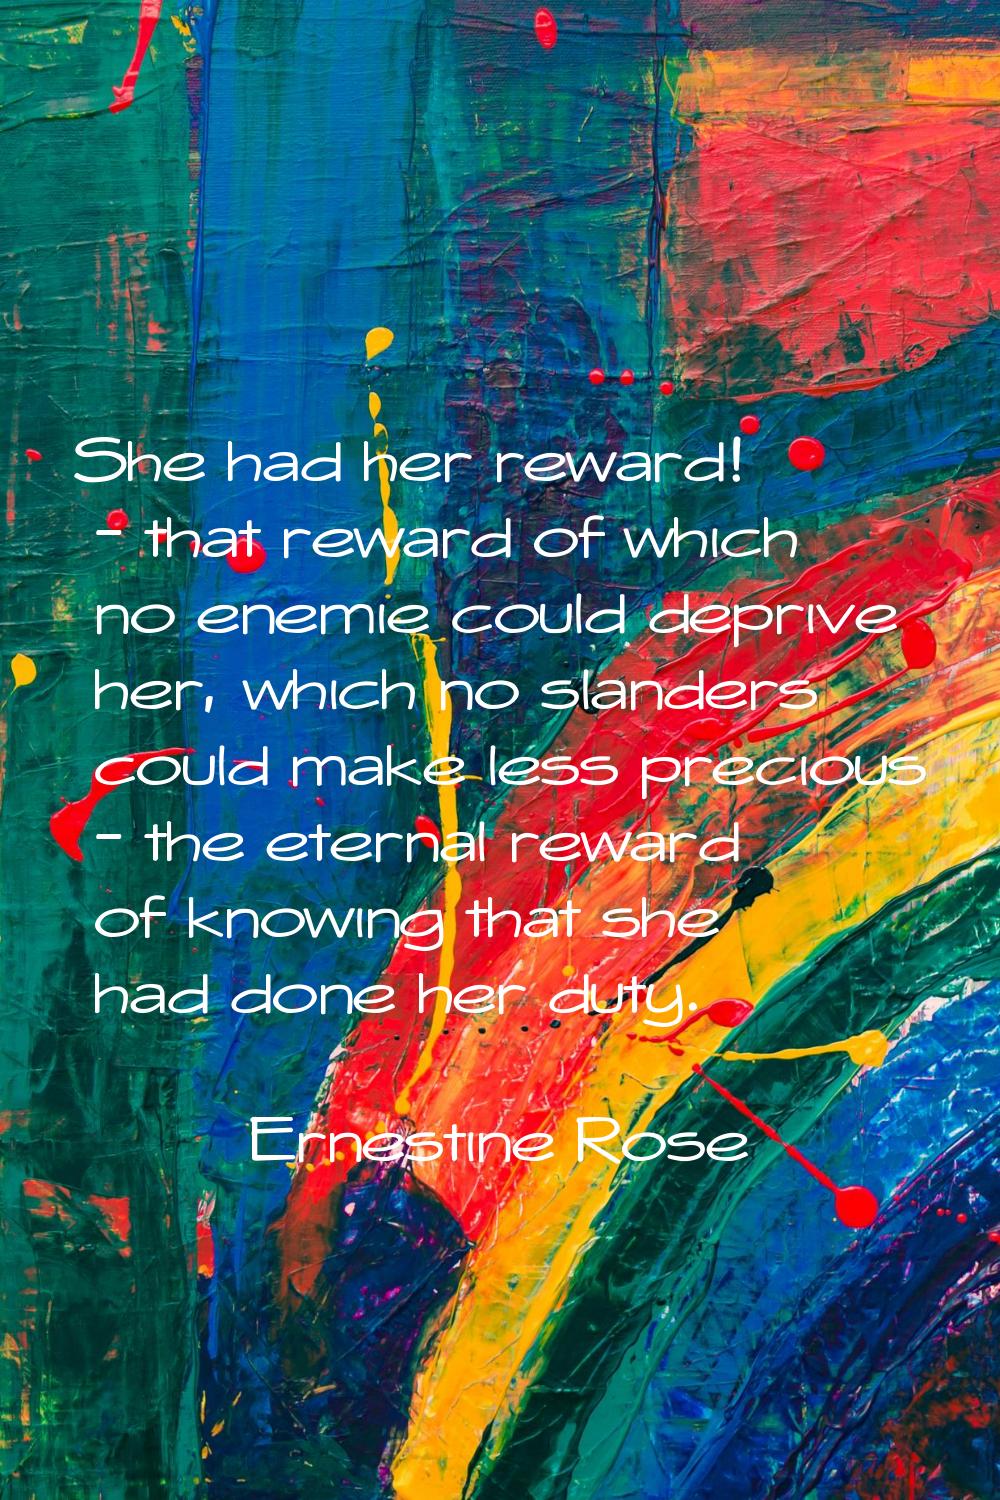 She had her reward! - that reward of which no enemie could deprive her, which no slanders could mak